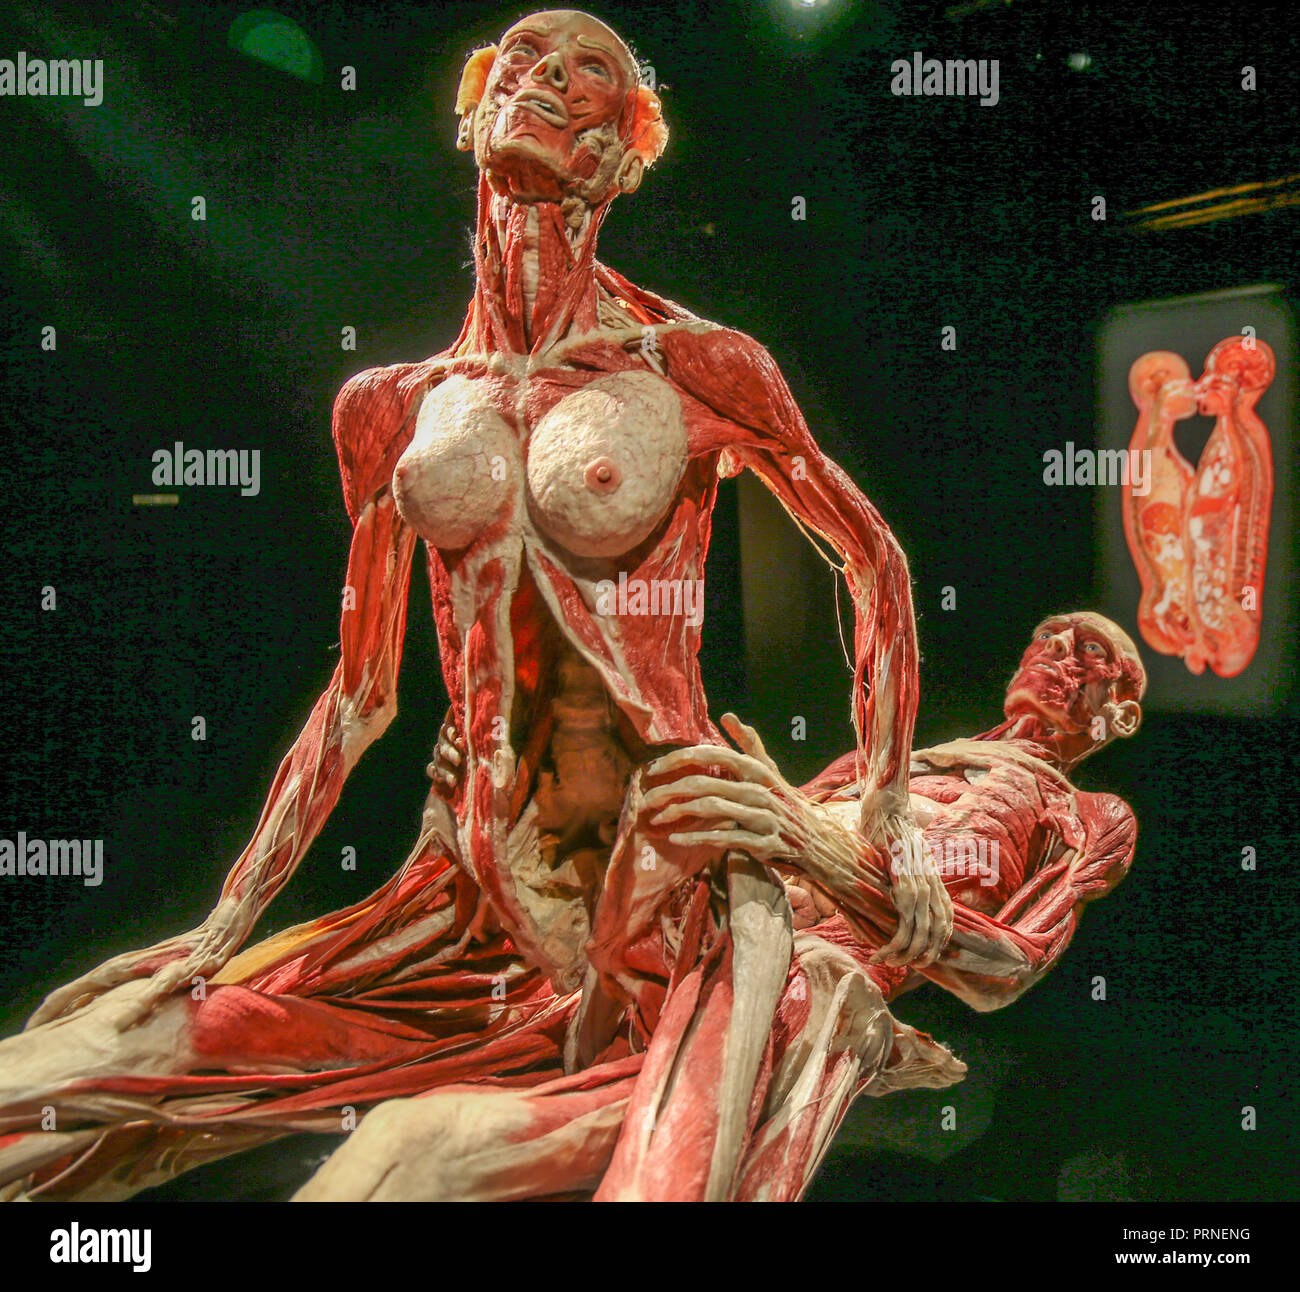 London Uk 04 October 2018 BODY WORLDS creating a permanent London flagship for the world’s most popular touring exhibition in the magnificent London Pavilion. The fusion of science, art and health education is one of the biggest new UK attractions to open in the past decade. Credit: Paul Quezada-Neiman/Alamy Live News Stock Photo